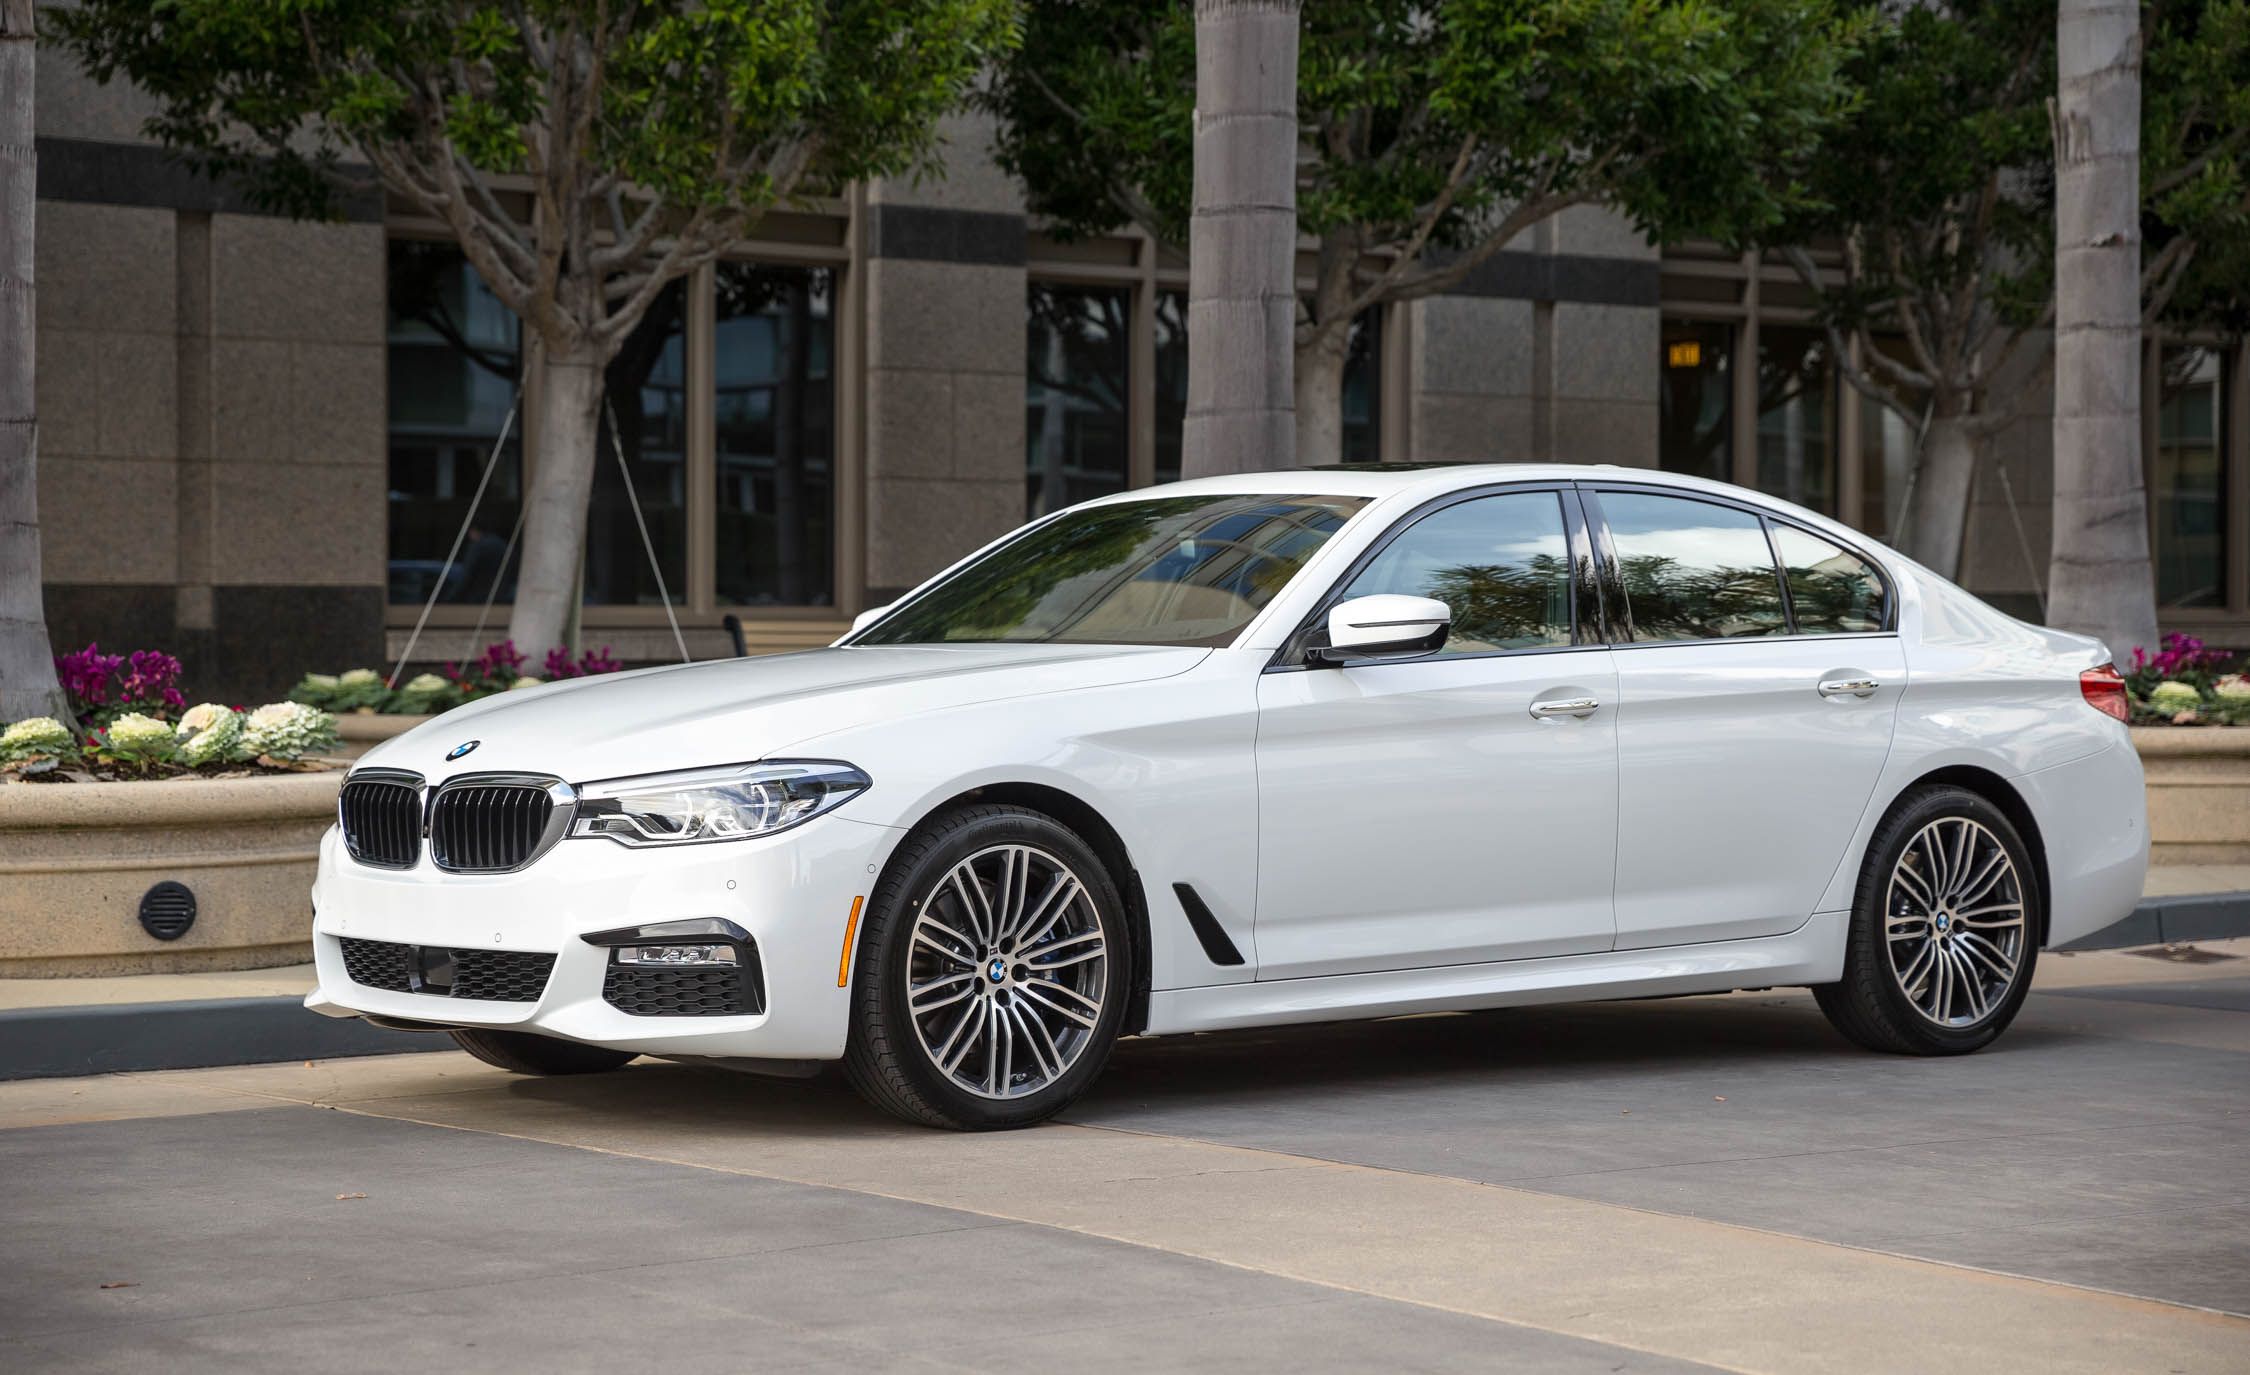 2017 BMW 530i | Cars Exclusive Videos and Photos Updates